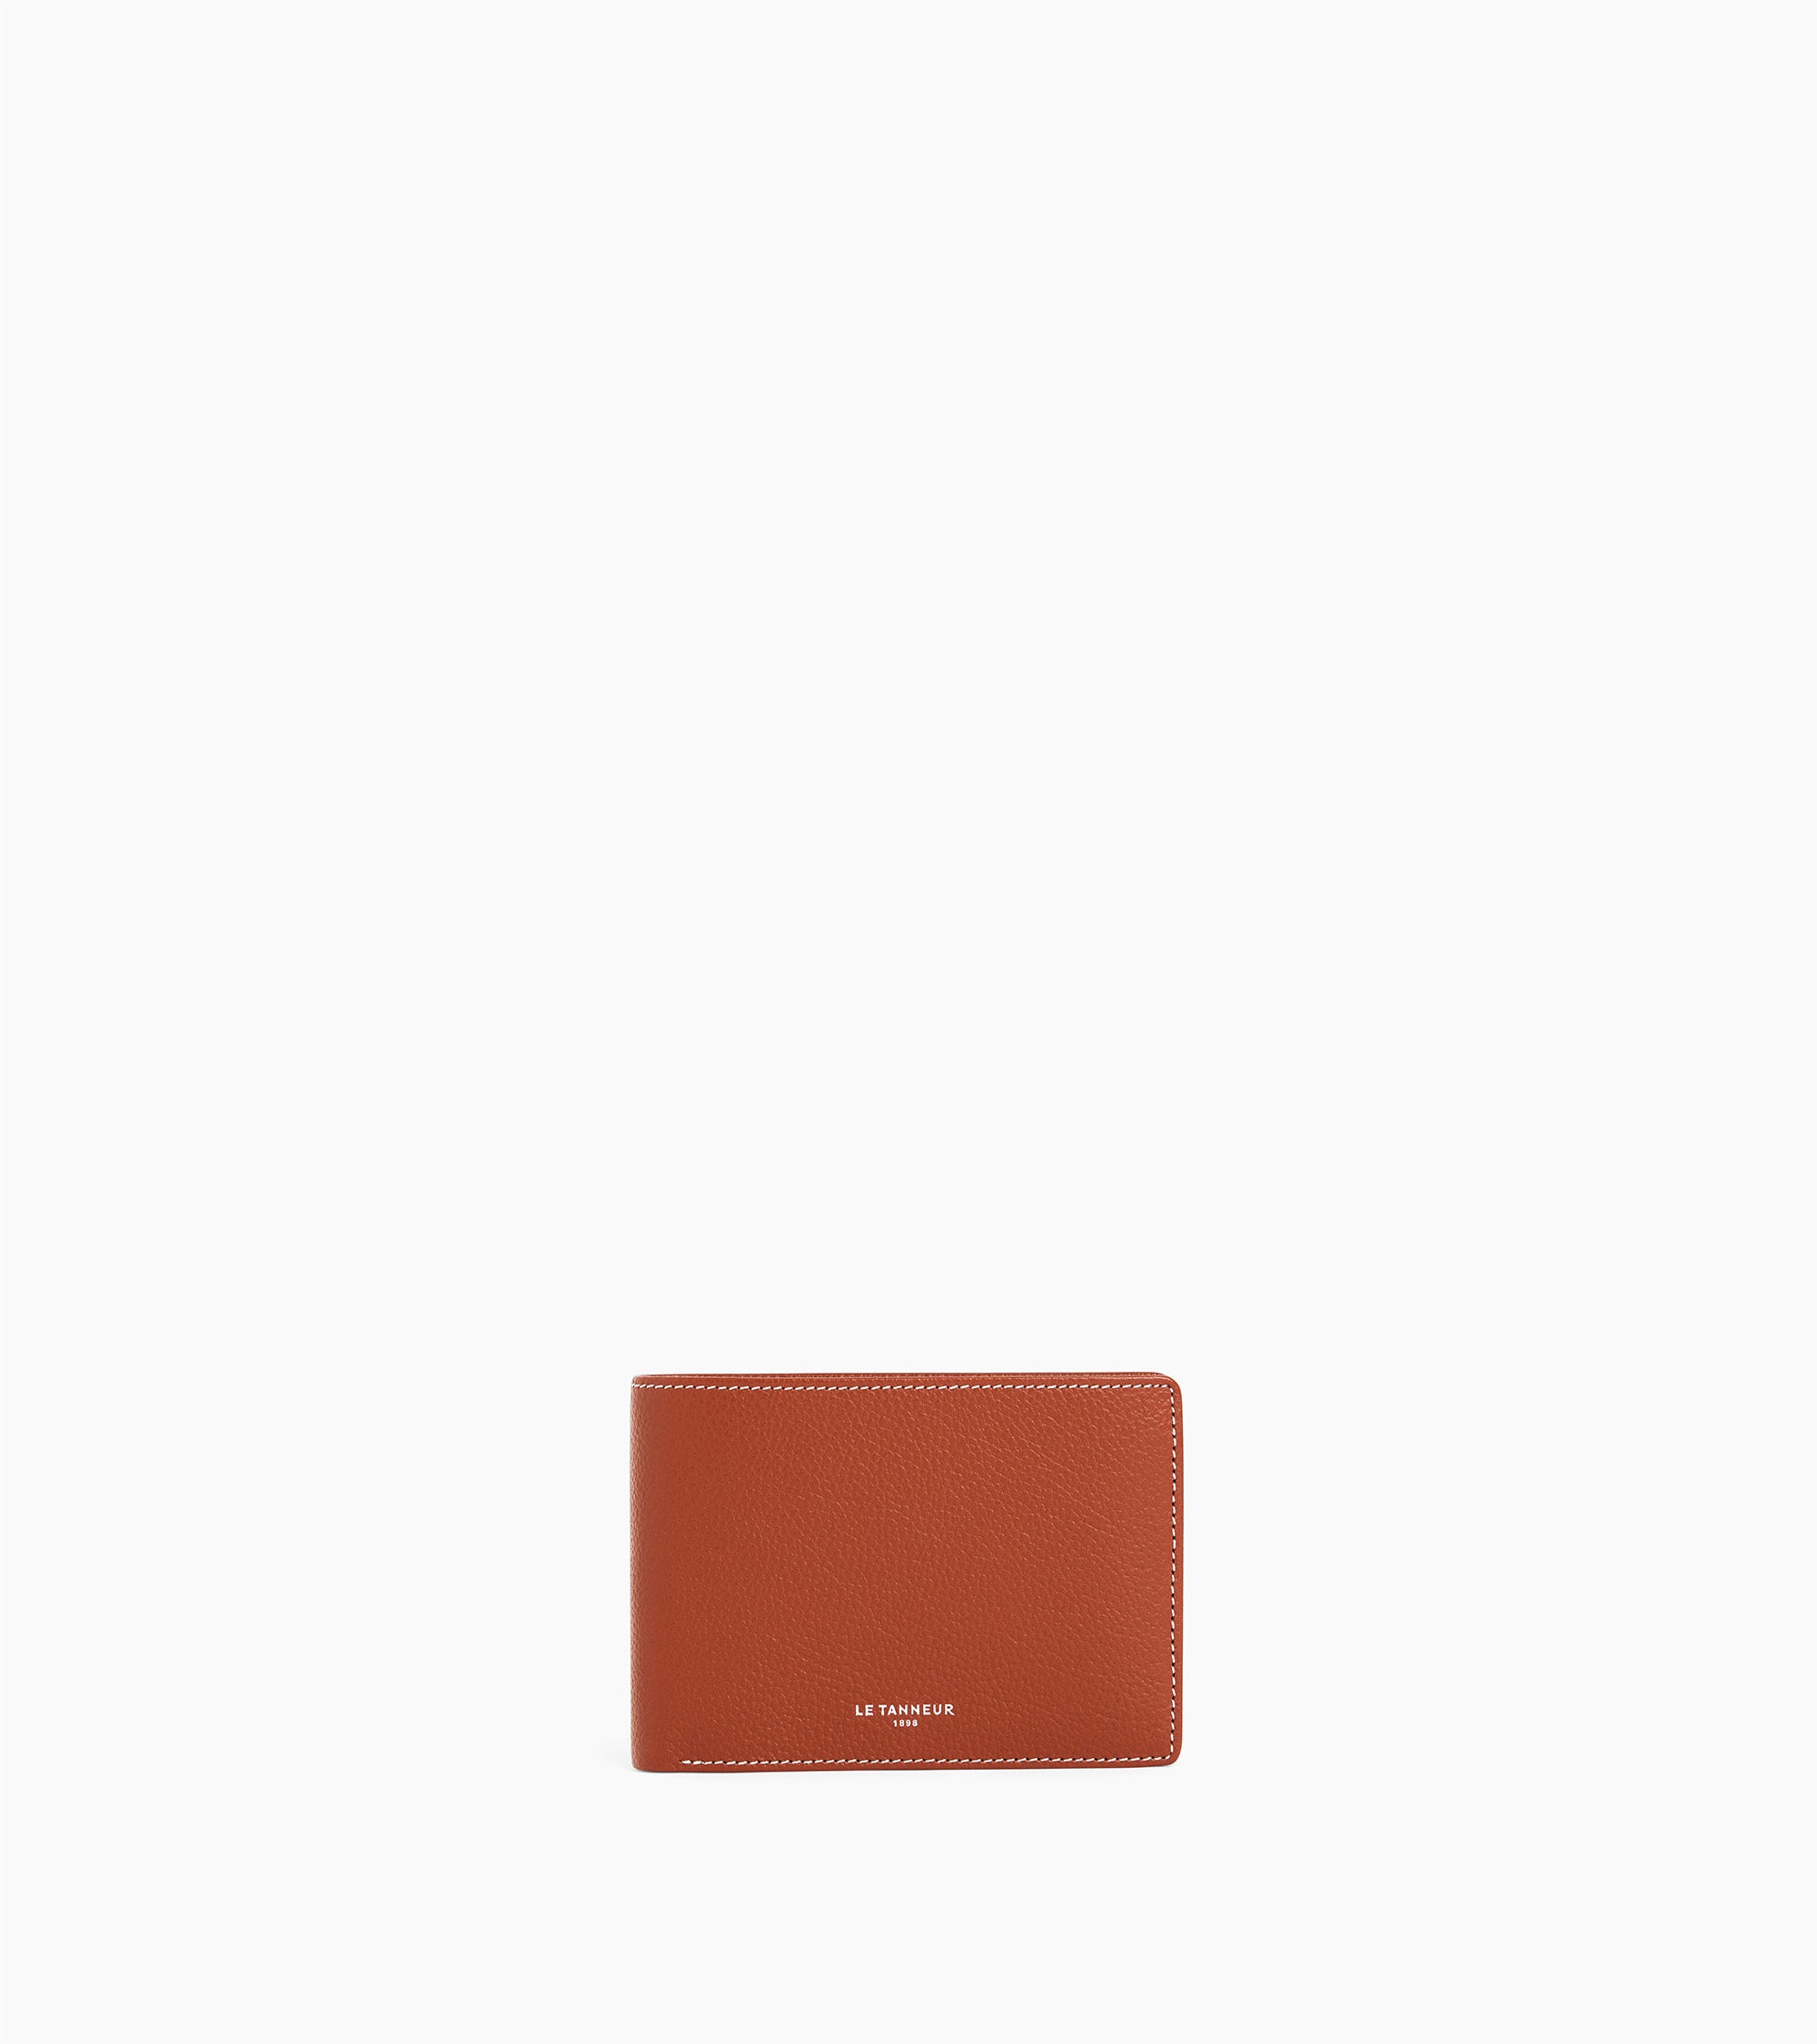 Emile flap wallet with 2 gussets in pebbled leather